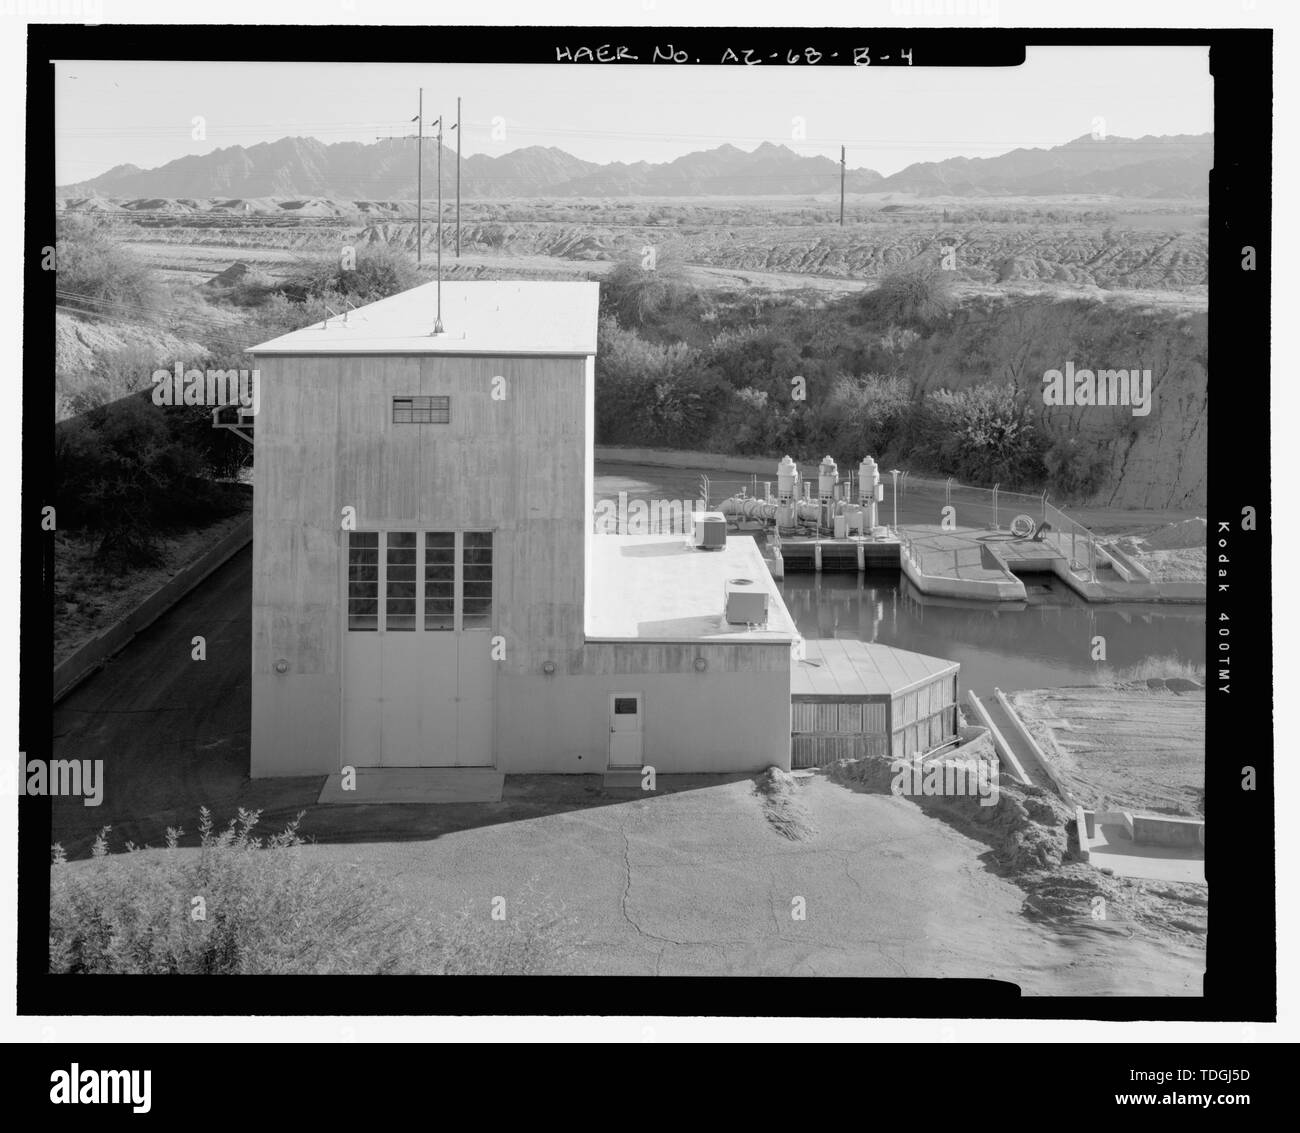 North side, showing folding double doors, main control room wing, and modern roof construction - Wellton-Mohawk Irrigation System, Pumping Plant No. 2, Bounded by Interstate 8 to south, Wellton, Yuma County, AZ Stock Photo